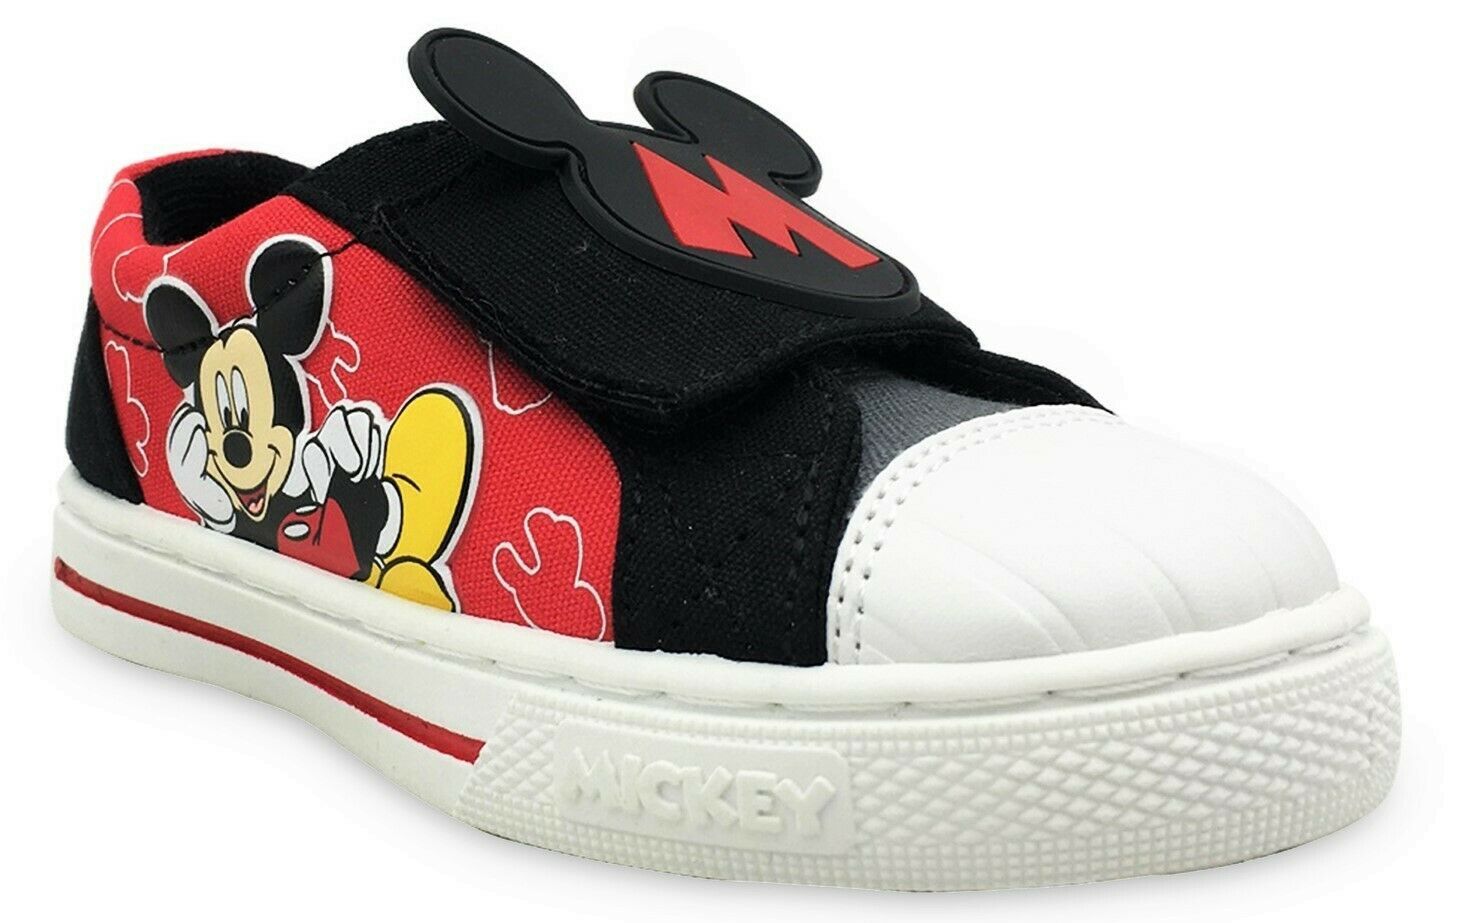 MICKEY MOUSE Canvas Slip-On Sneakers Athletic Shoes NWT Toddler's Size 7, 8 or 9